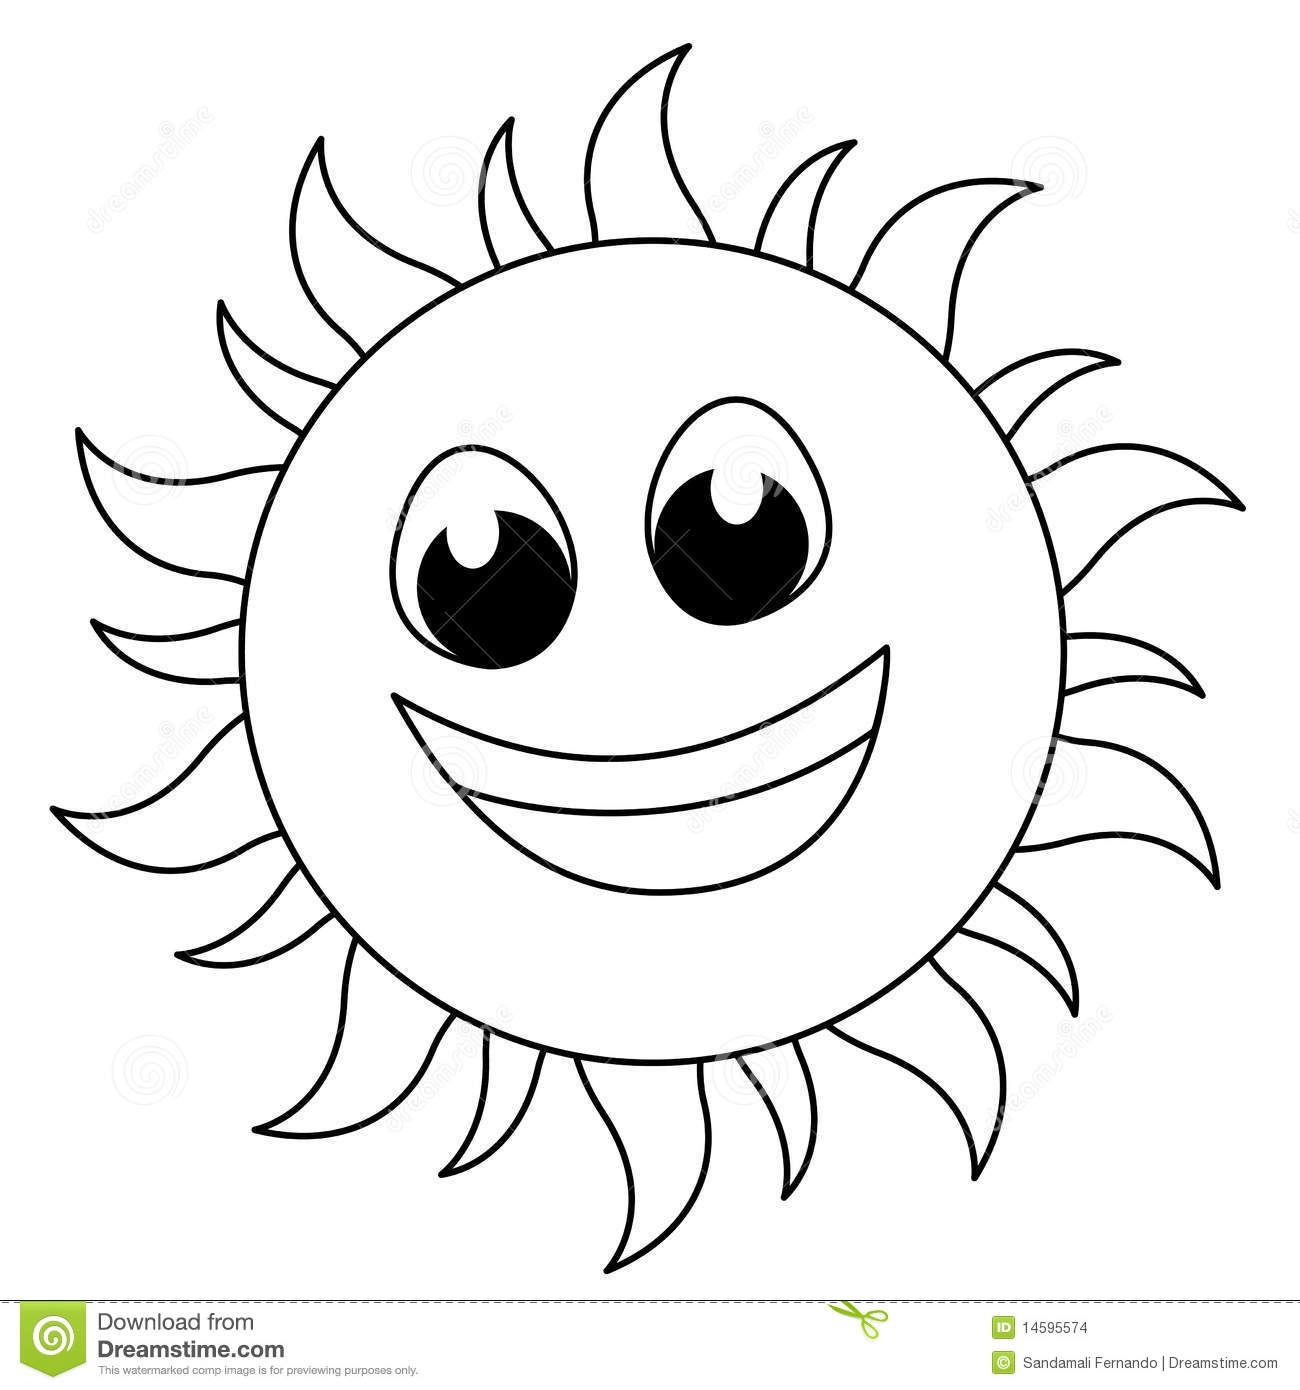 Cute sunshine black and white clipart collection jpg